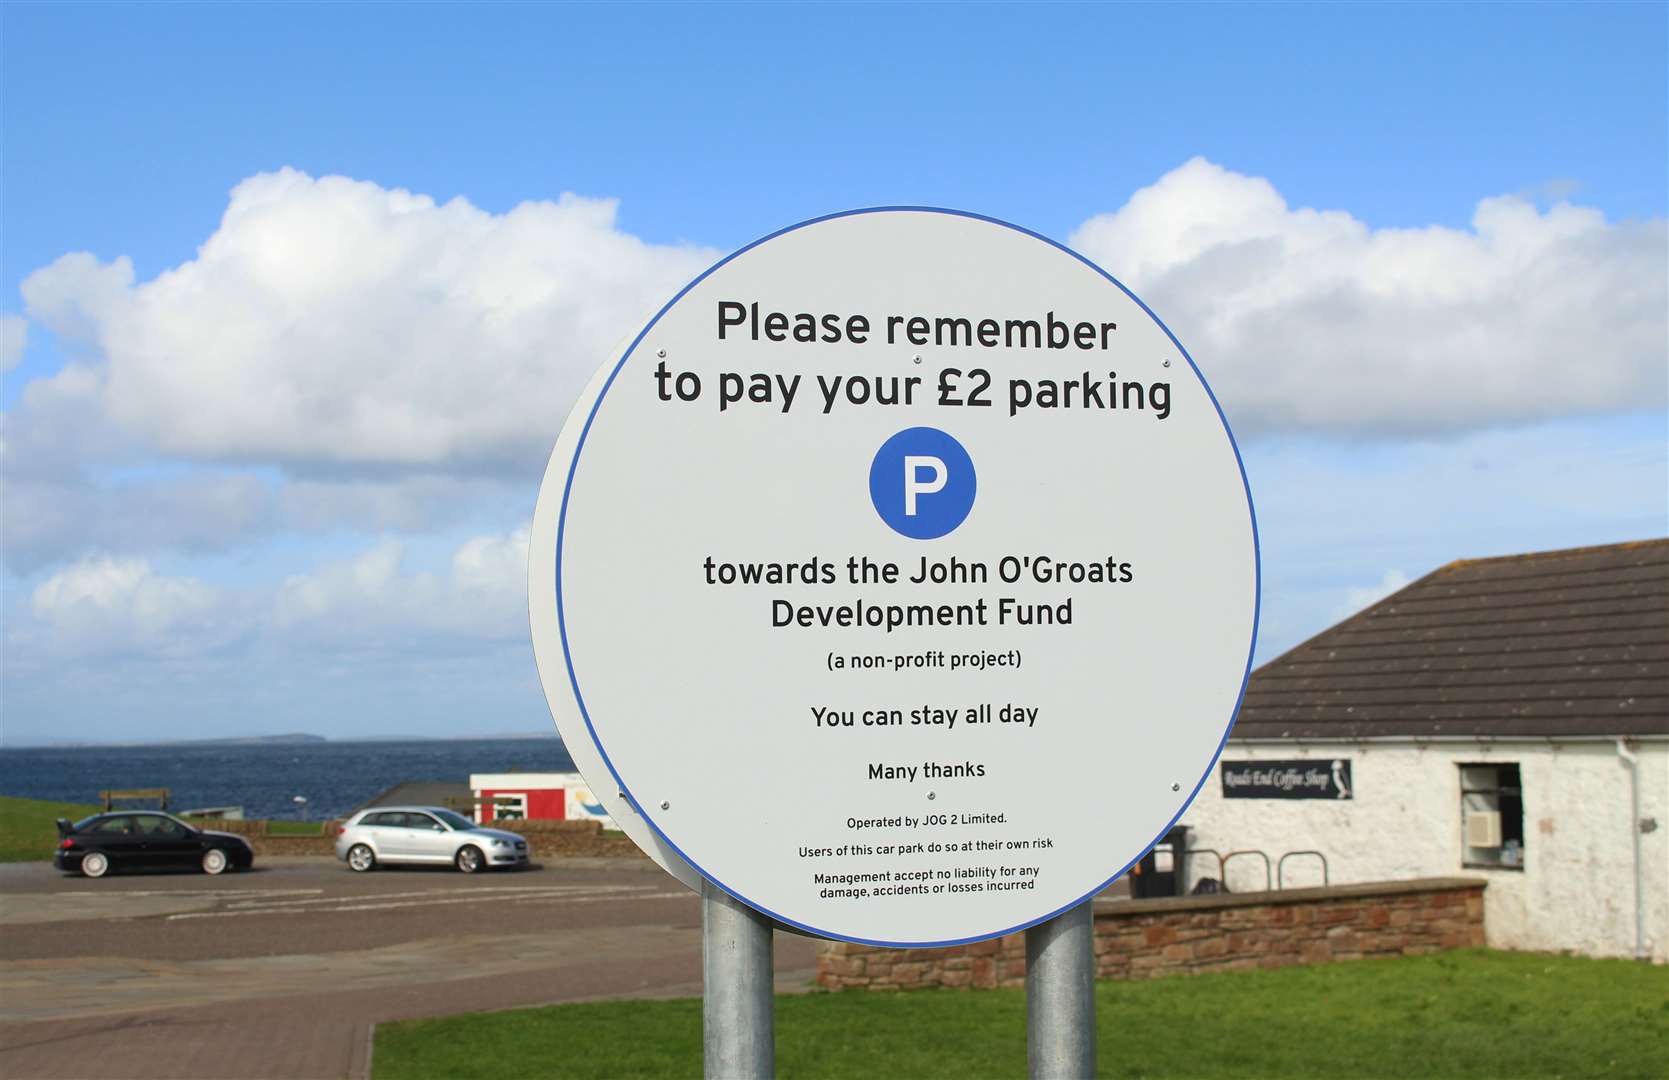 Large signs were installed at John O'Groats to highlight the parking charge.